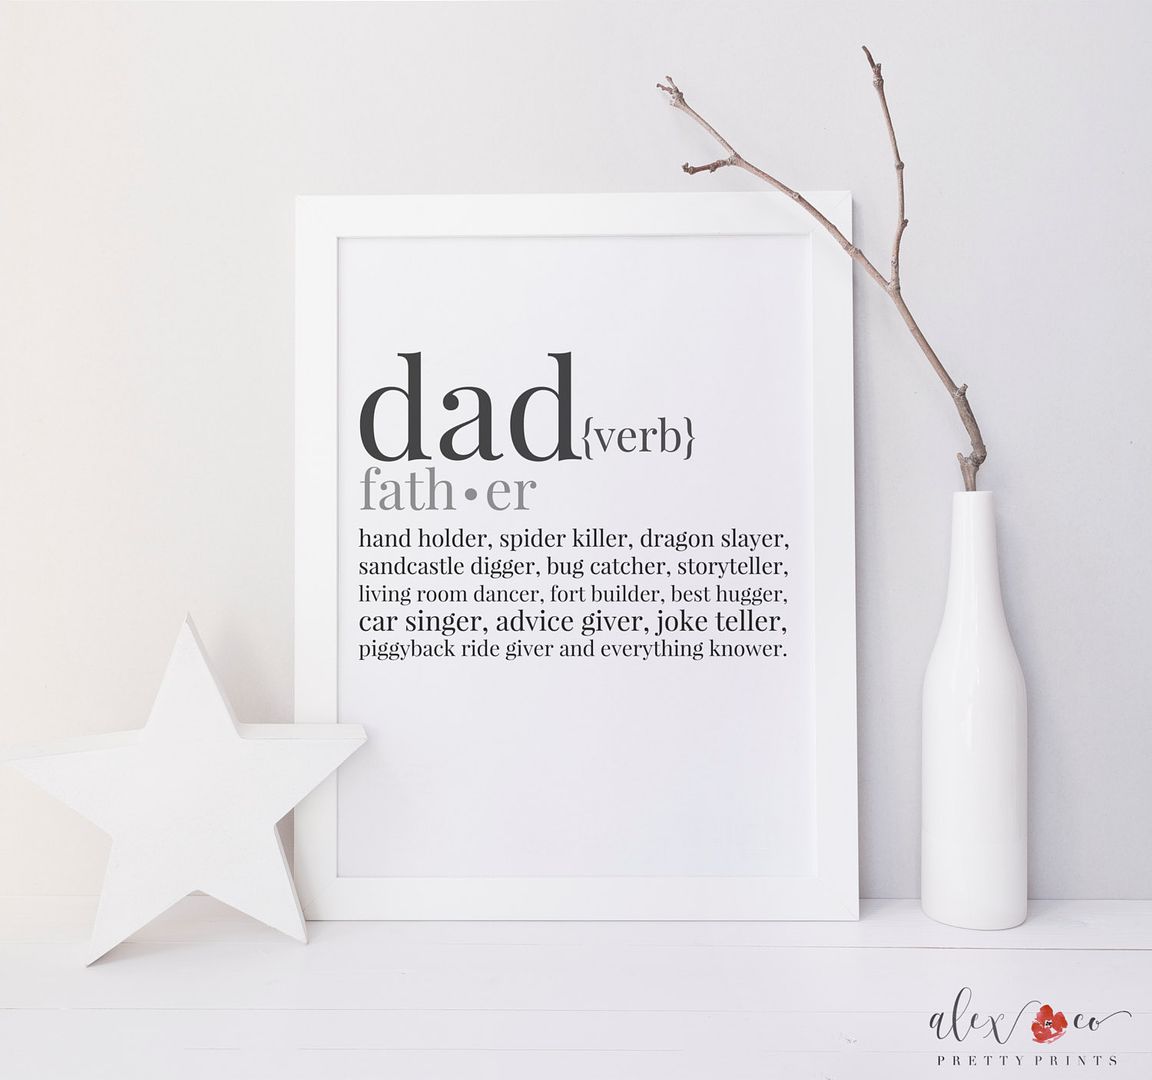 Father's Day gifts under $25: Printable dad definition artwork - so sweet!